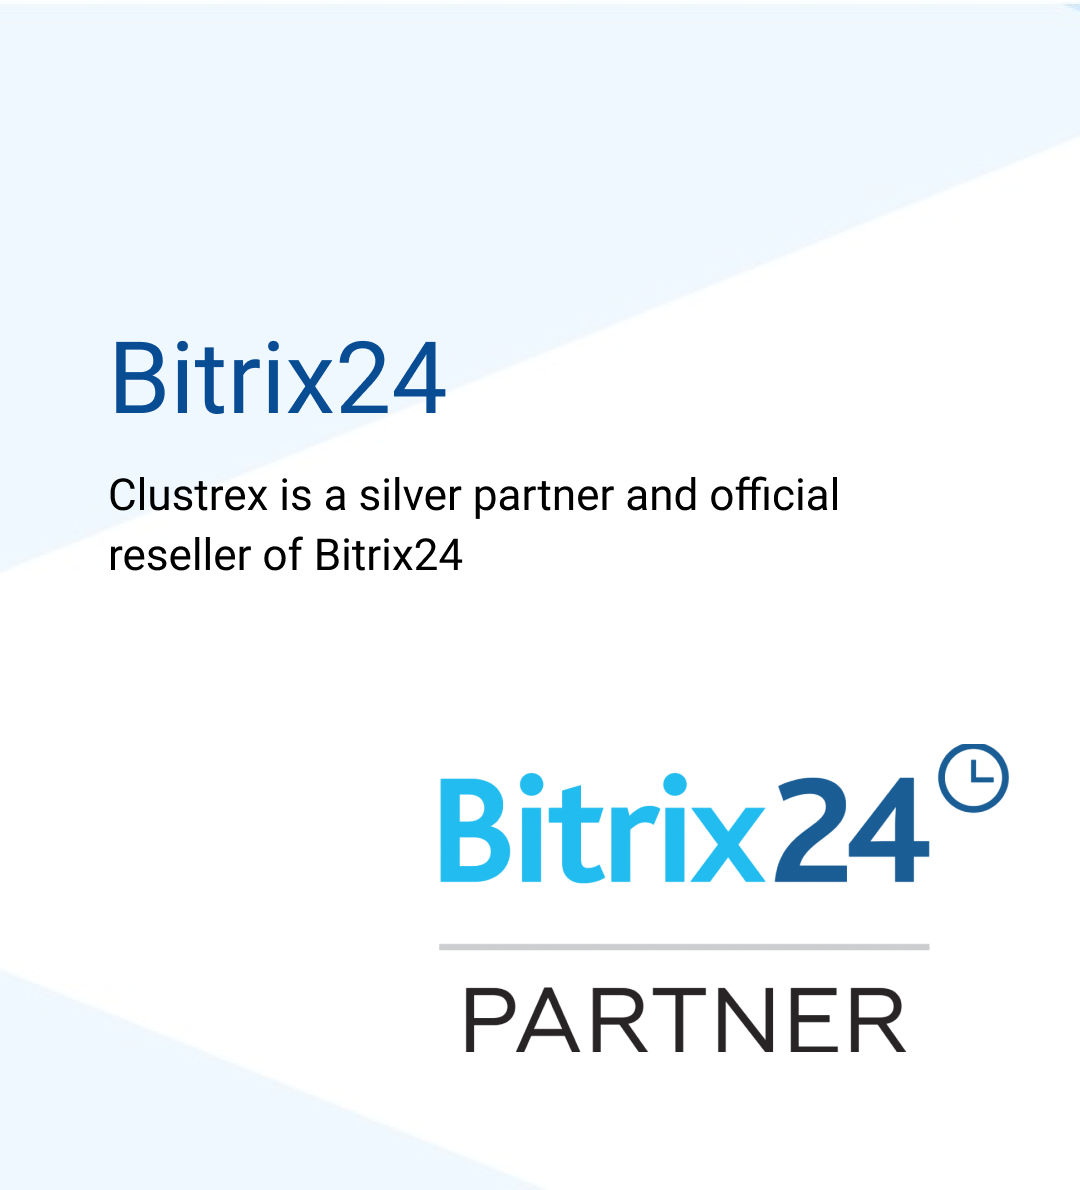 Clustrex is a silver partner and official reseller of Bitrix24